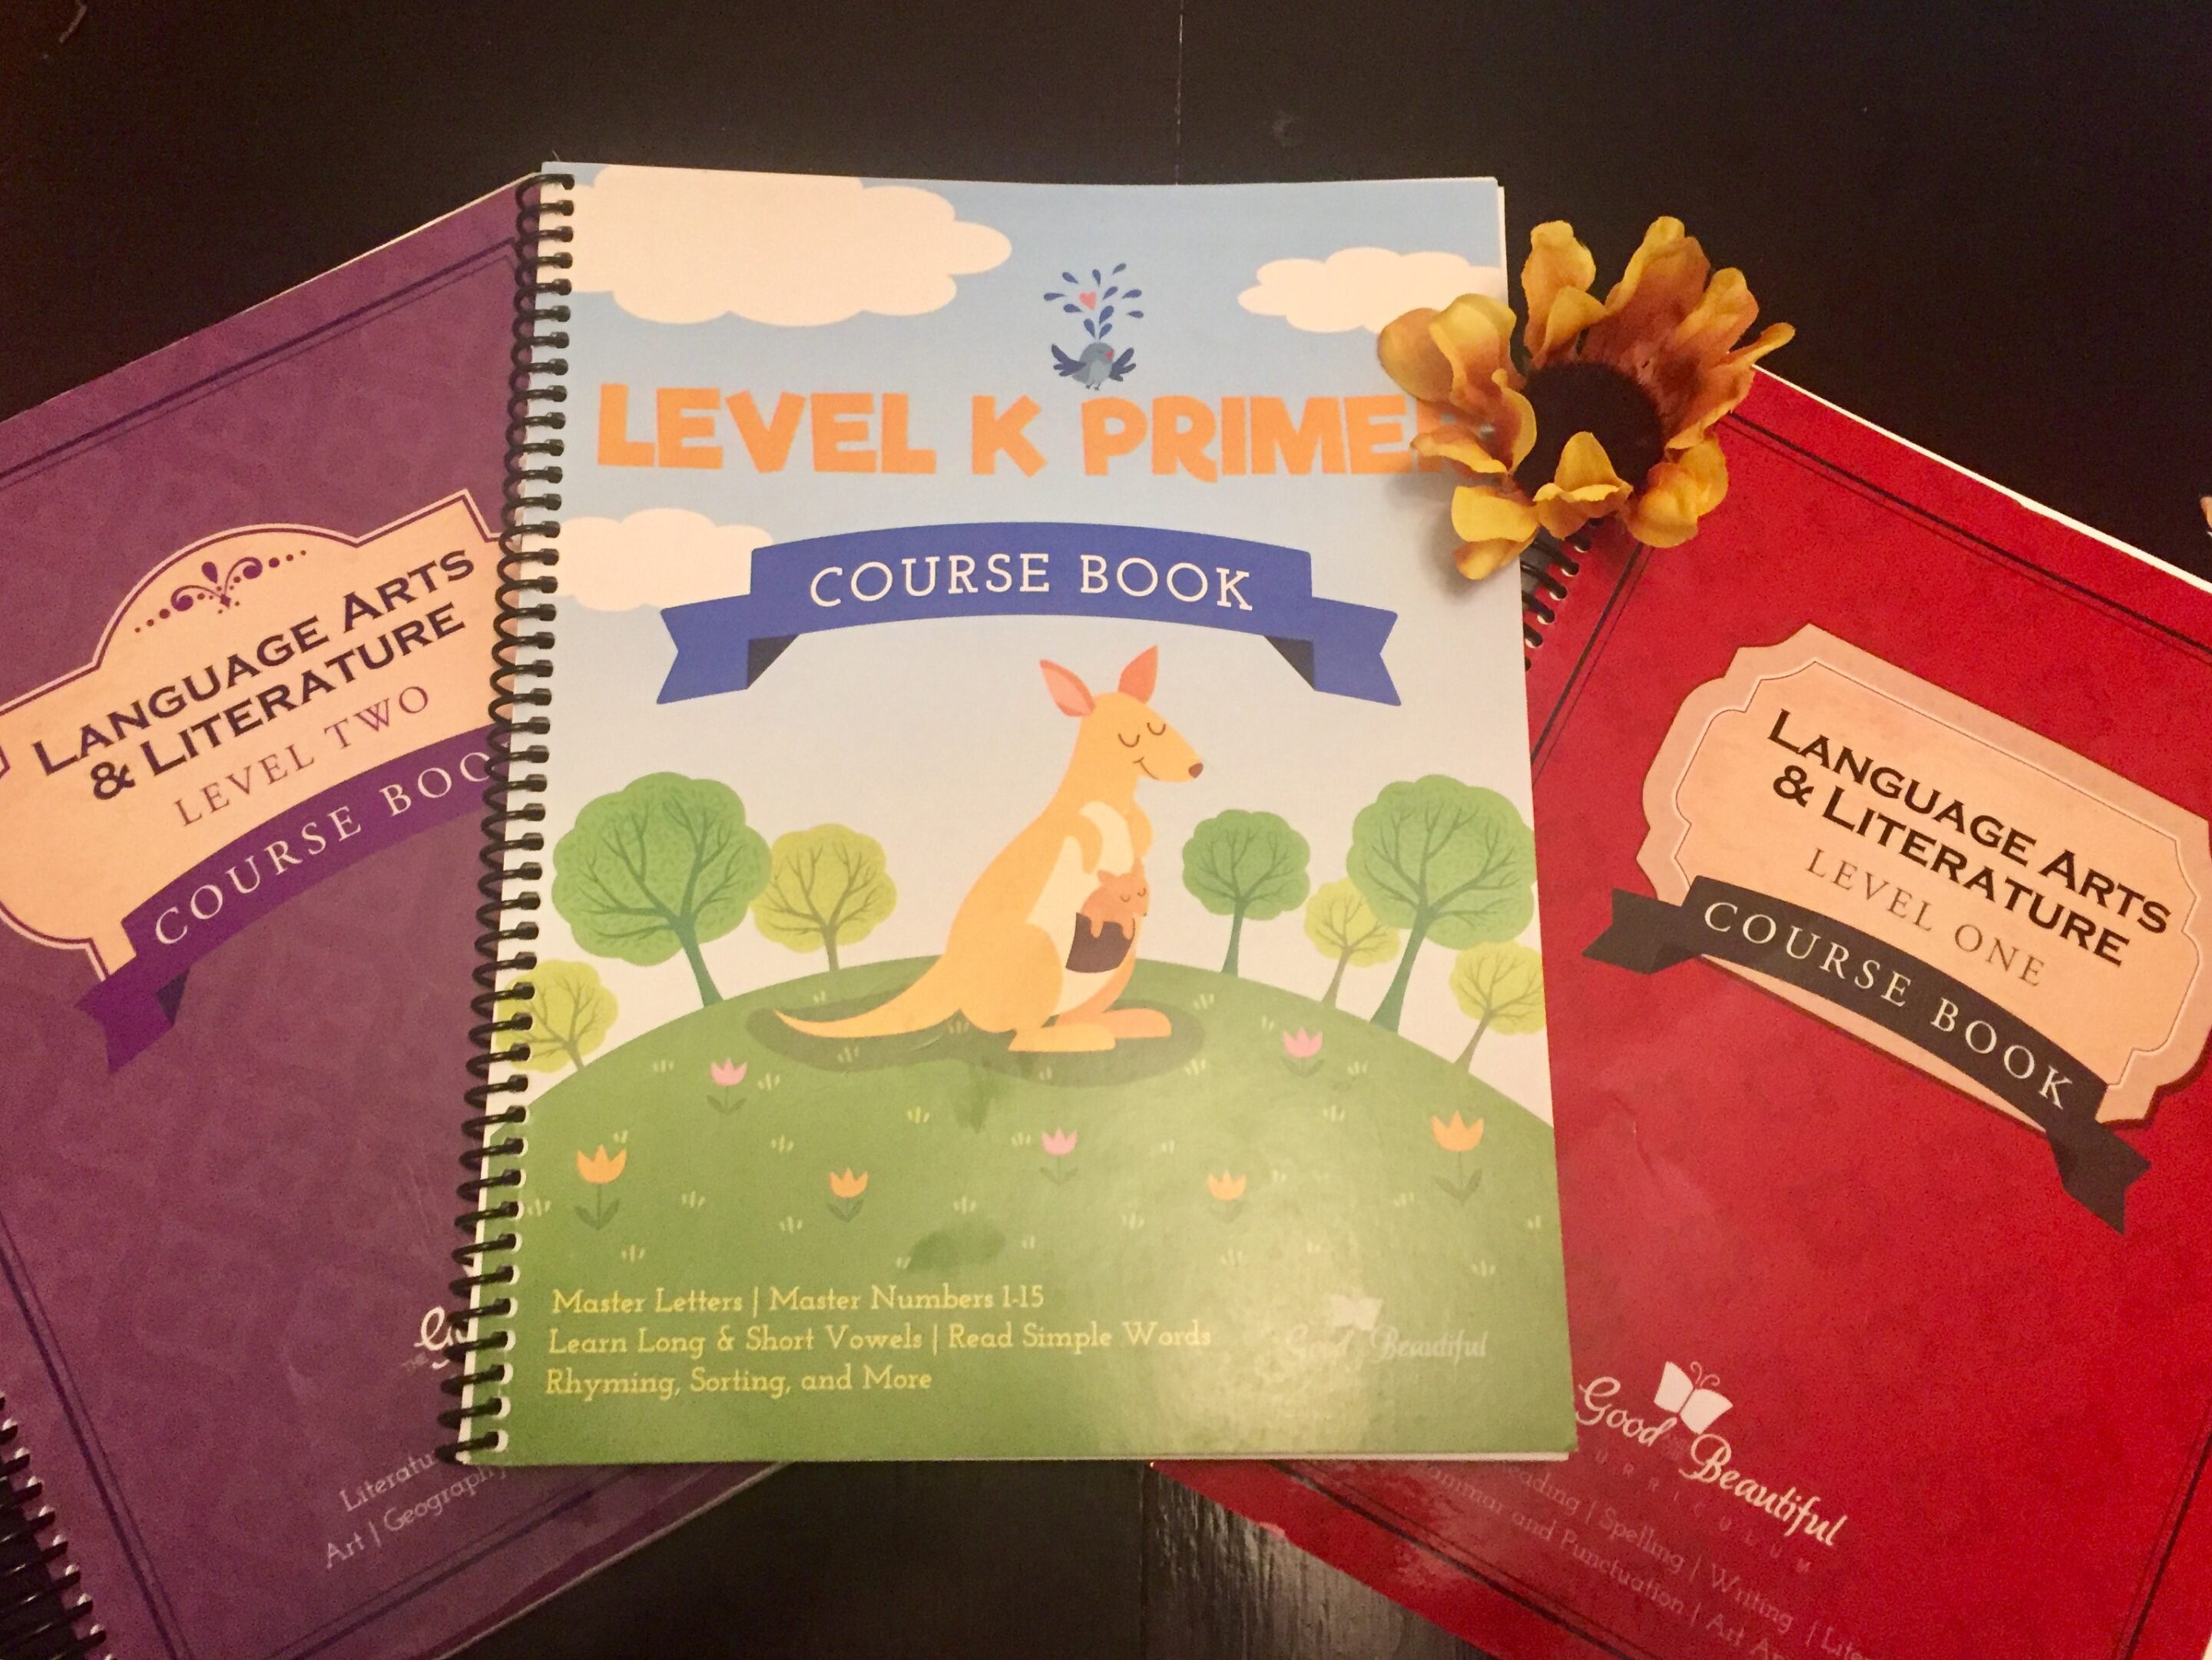 Levels 1, 2, and K Primer from the Good and the Beautiful 